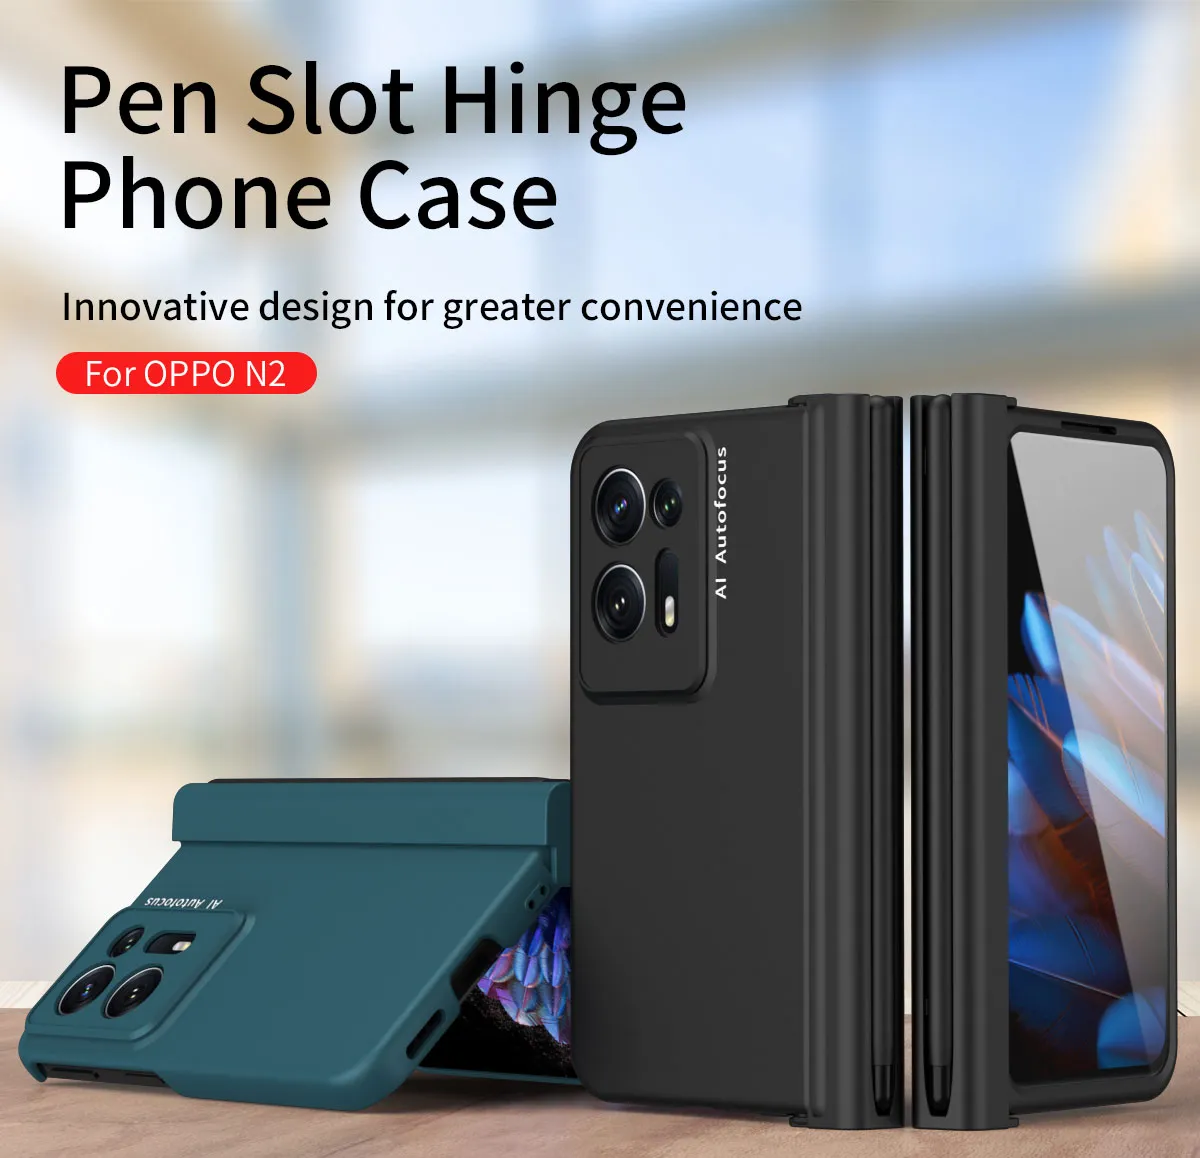 Hard Pen Slot Cases For Oppo Find N2 Case Glass Film Screen Protector Hinge 360 Protection Cover